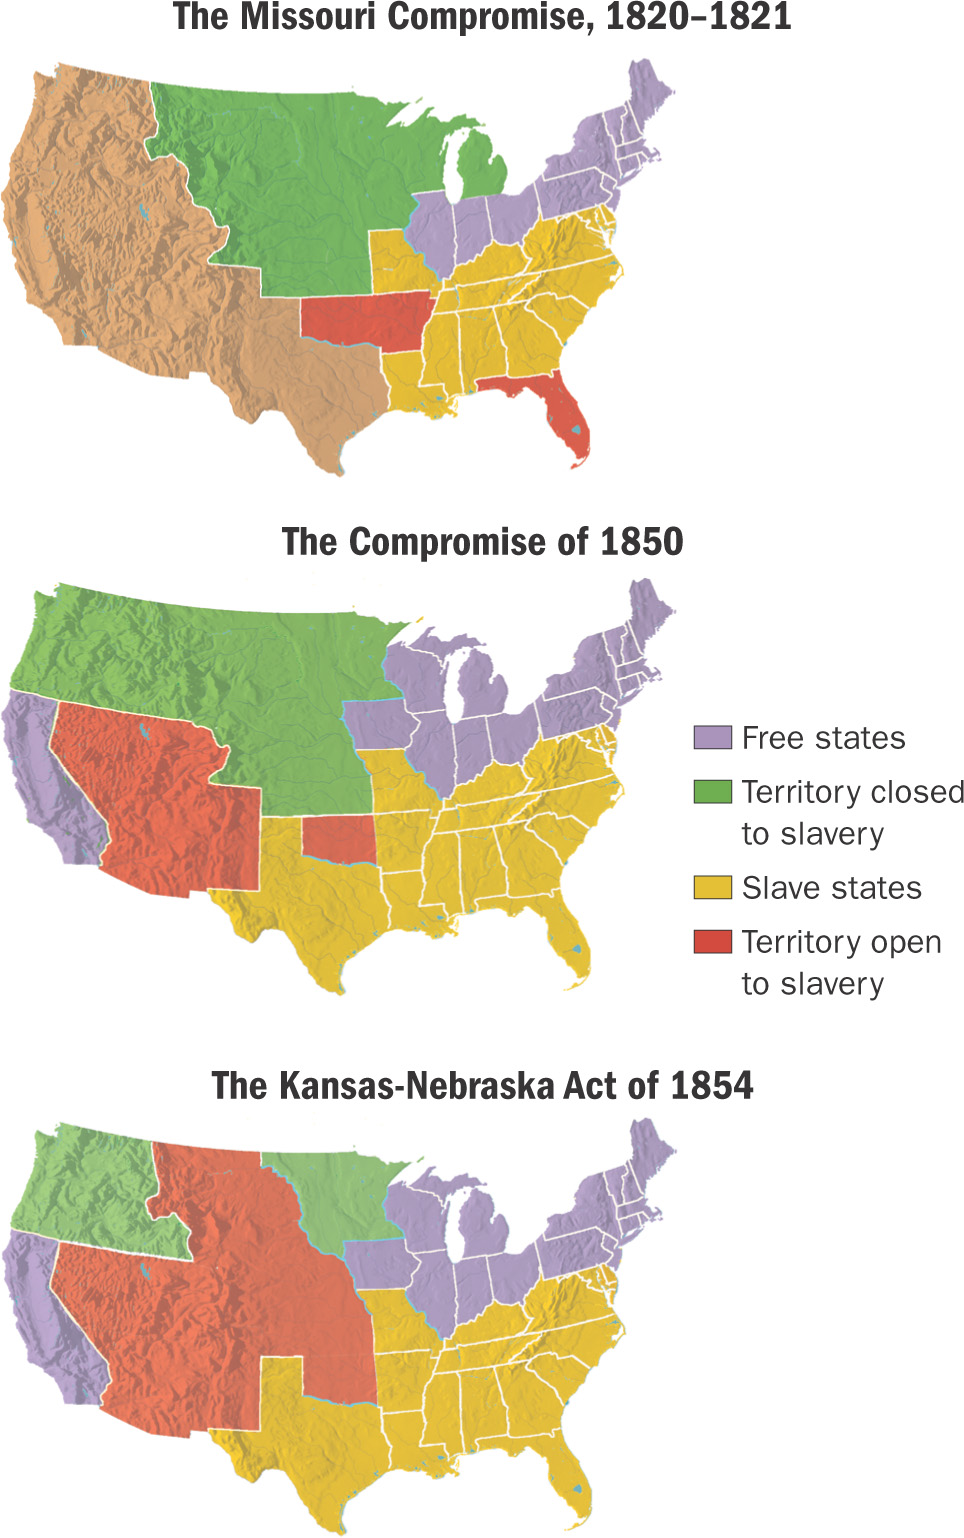 Three maps, titled The Missouri Compromise, The Compromise of 1850, and the Kansas-Nebraska Act./><prodnote render=